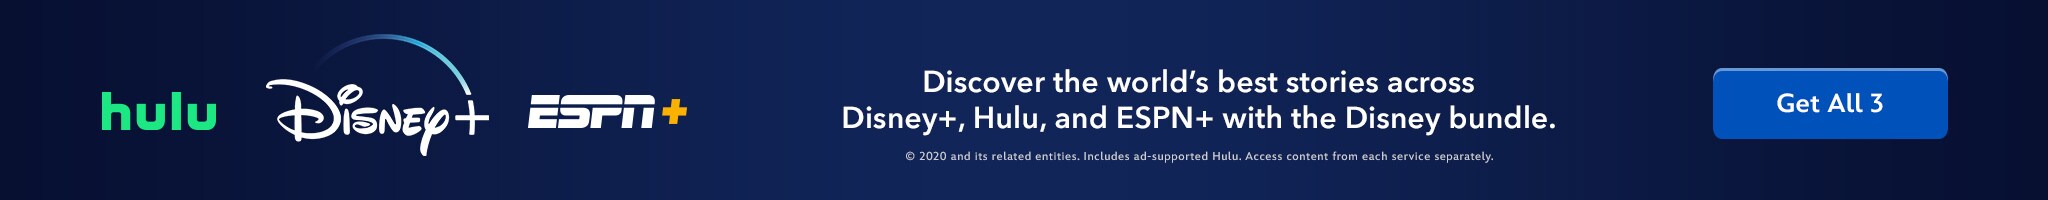 Disney+ | Hulu | ESPN+ | Discover the world's best stories across Disney+, Hulu, and ESPN+ with the Disney bundle. Get All 3.